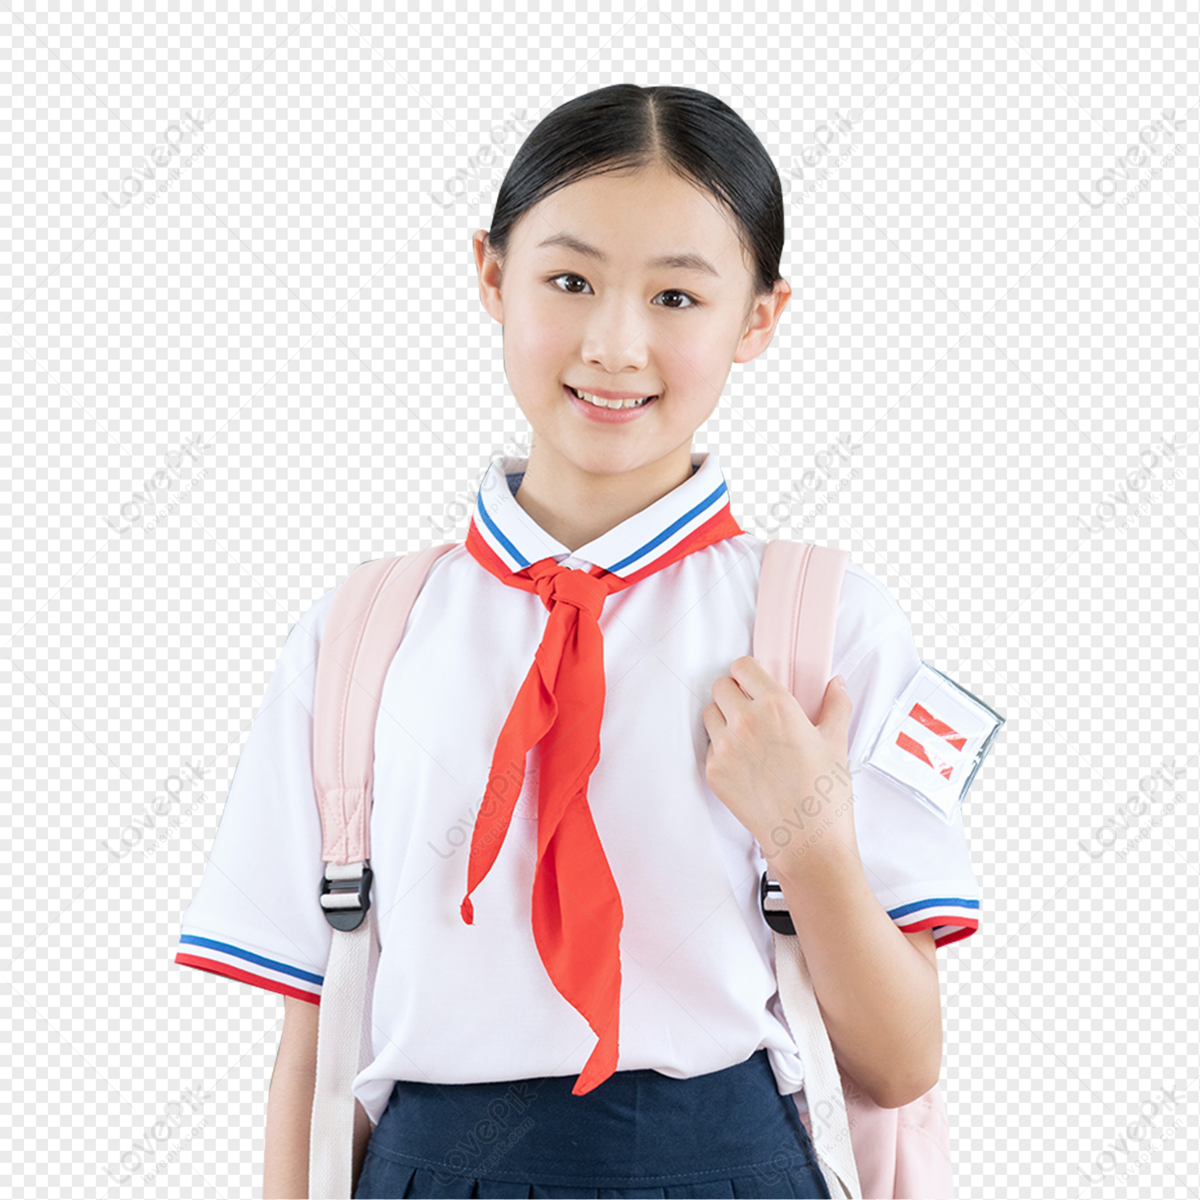 Junior High School Student Image PNG Transparent Background And Clipart  Image For Free Download - Lovepik | 401807310